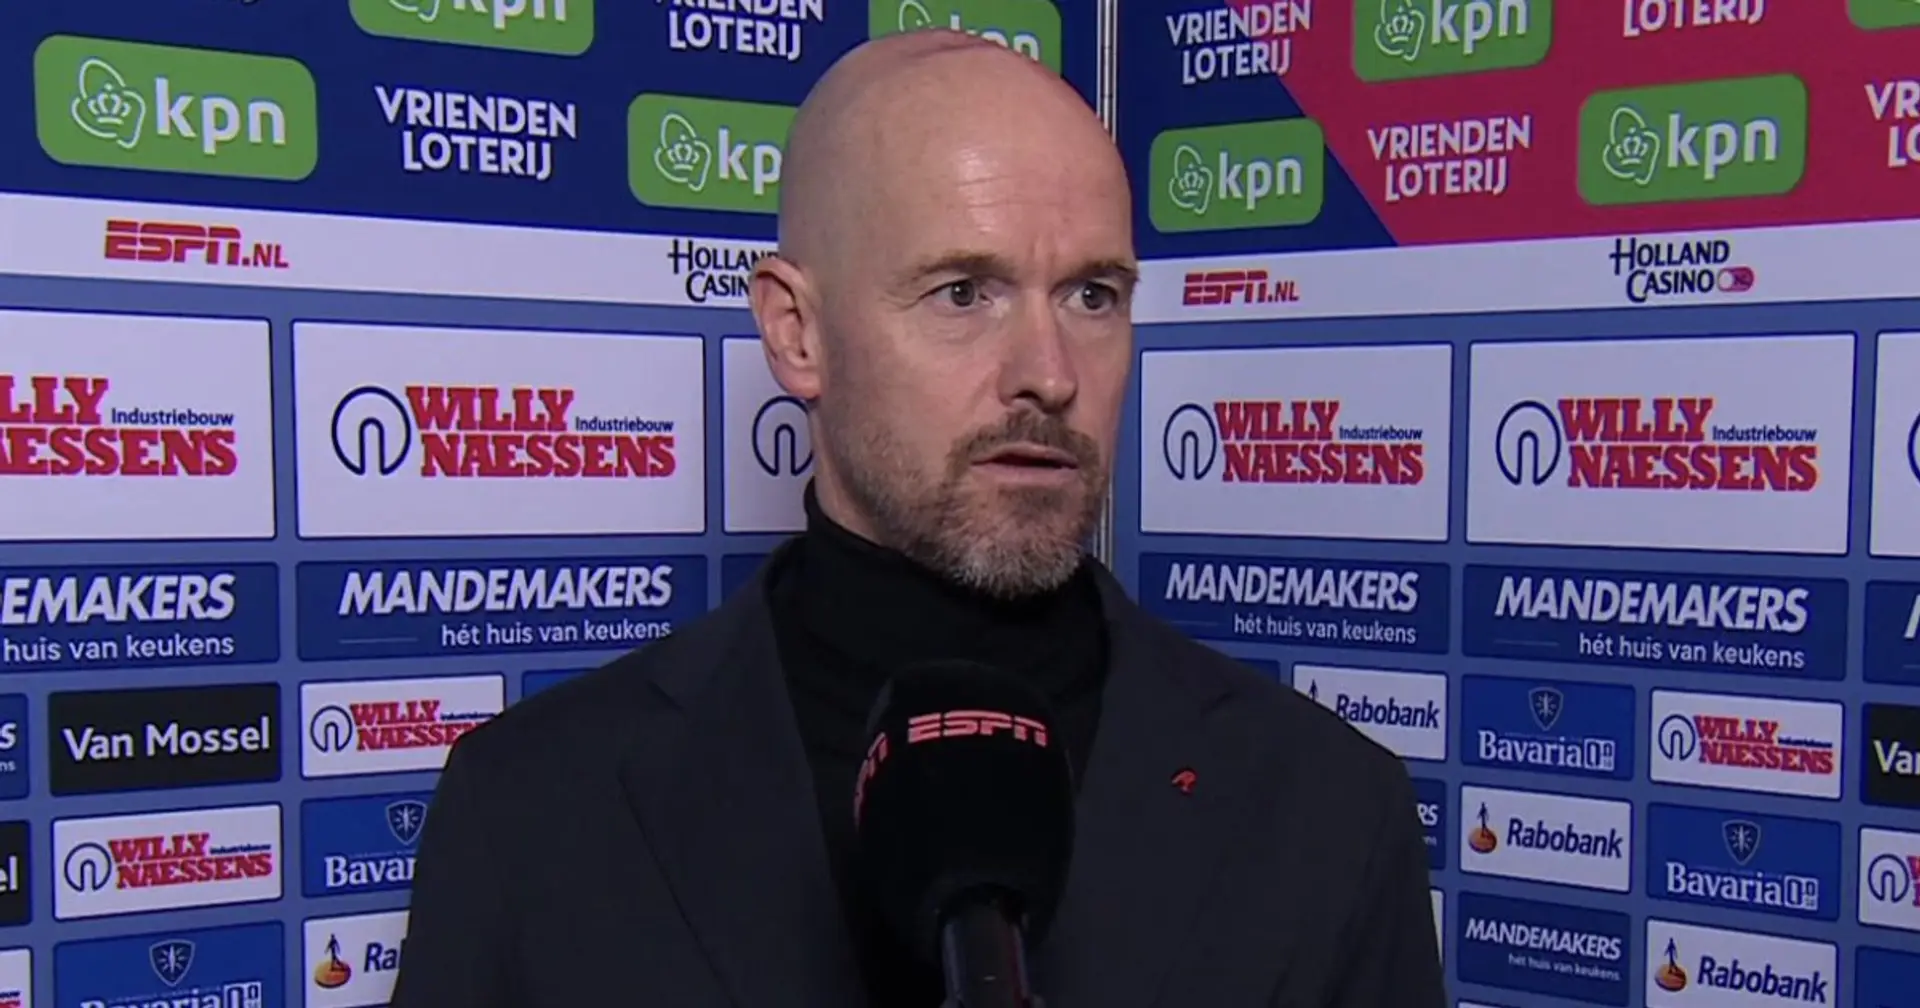 'I'm not reacting': Frustrated Erik ten Hag bombarded with questions over Man United job during Ajax clash